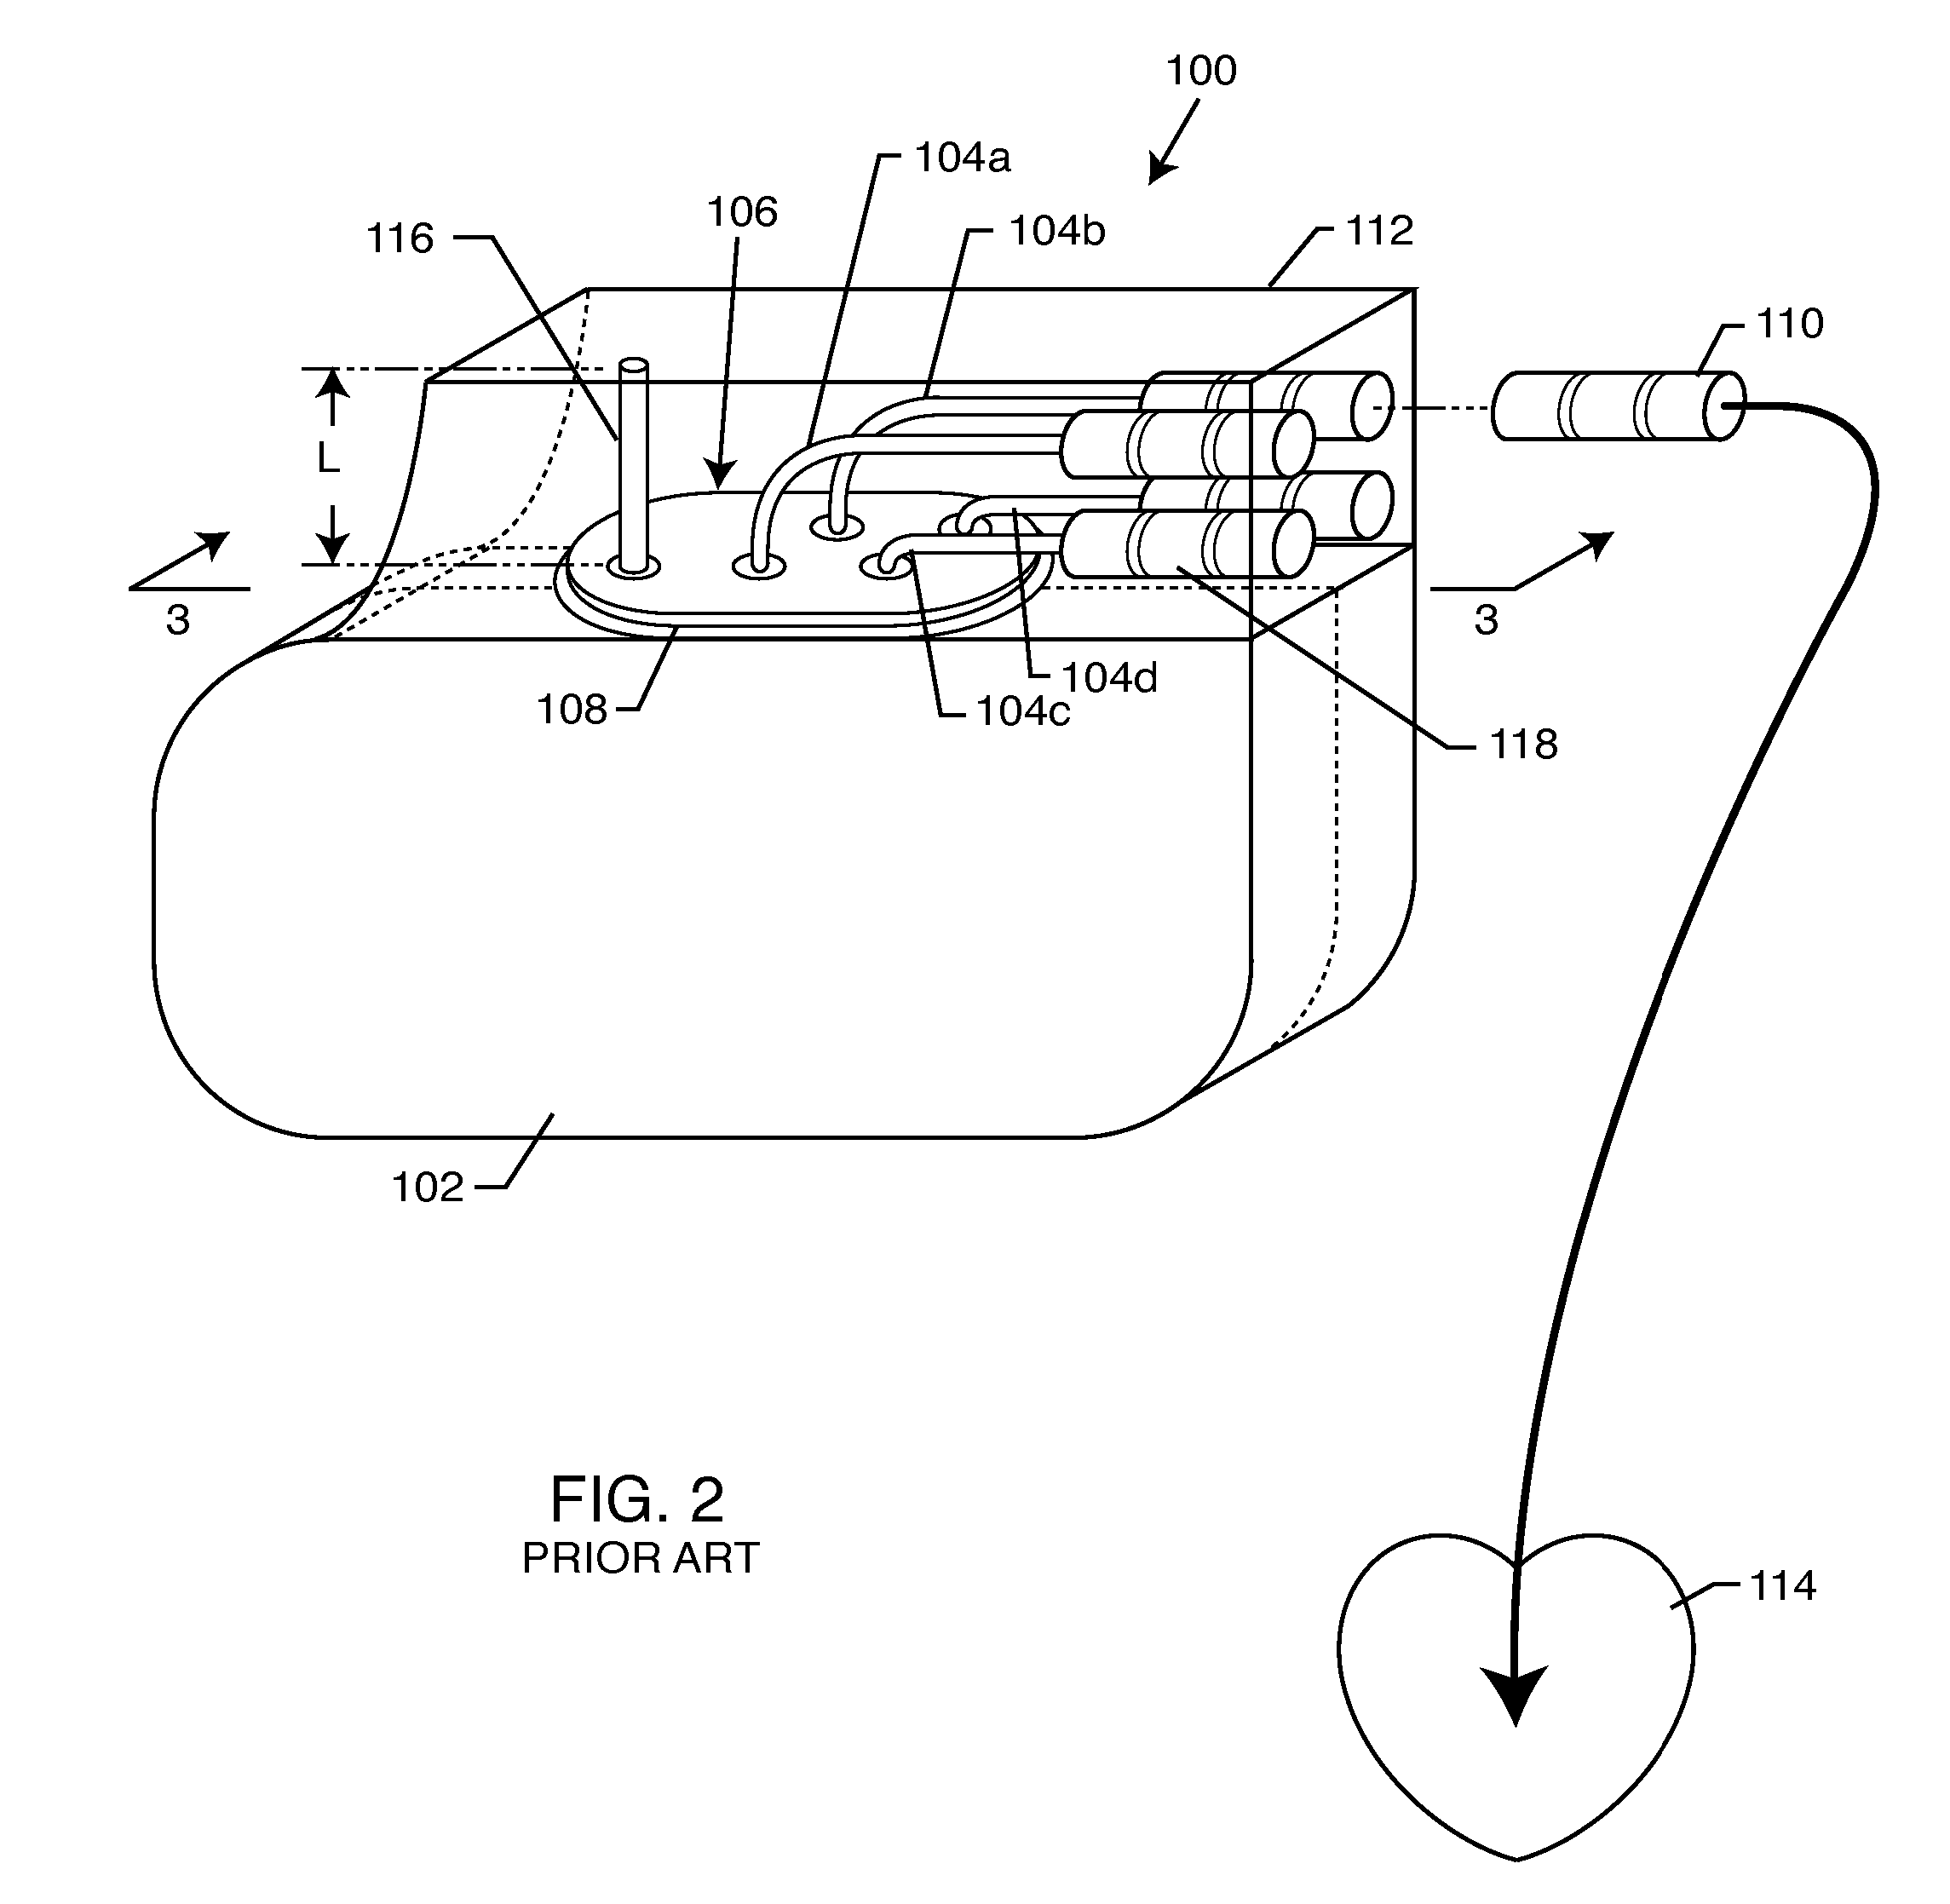 Implantable lead with a band stop filter having a capacitor in parallel with an inductor embedded in a dielectric body